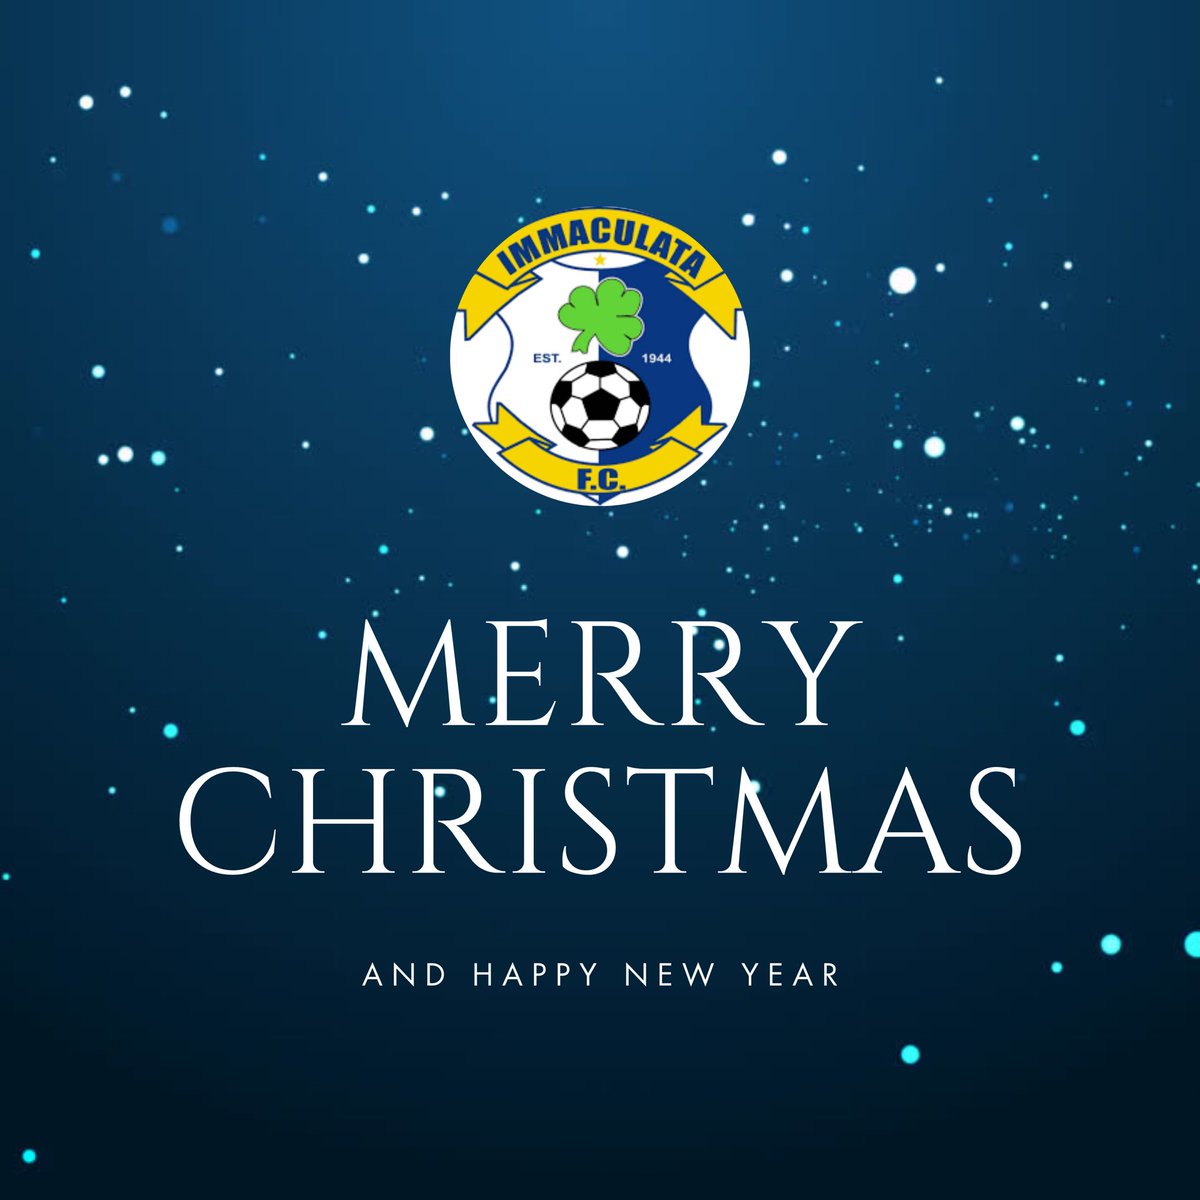 We would like to take this opportunity to wish our fans, players & coaching staff a very Merry Christmas 🎅🏼 Also a special mention as always to our Club Sponsors - Thank You! Immaculata FC Committee